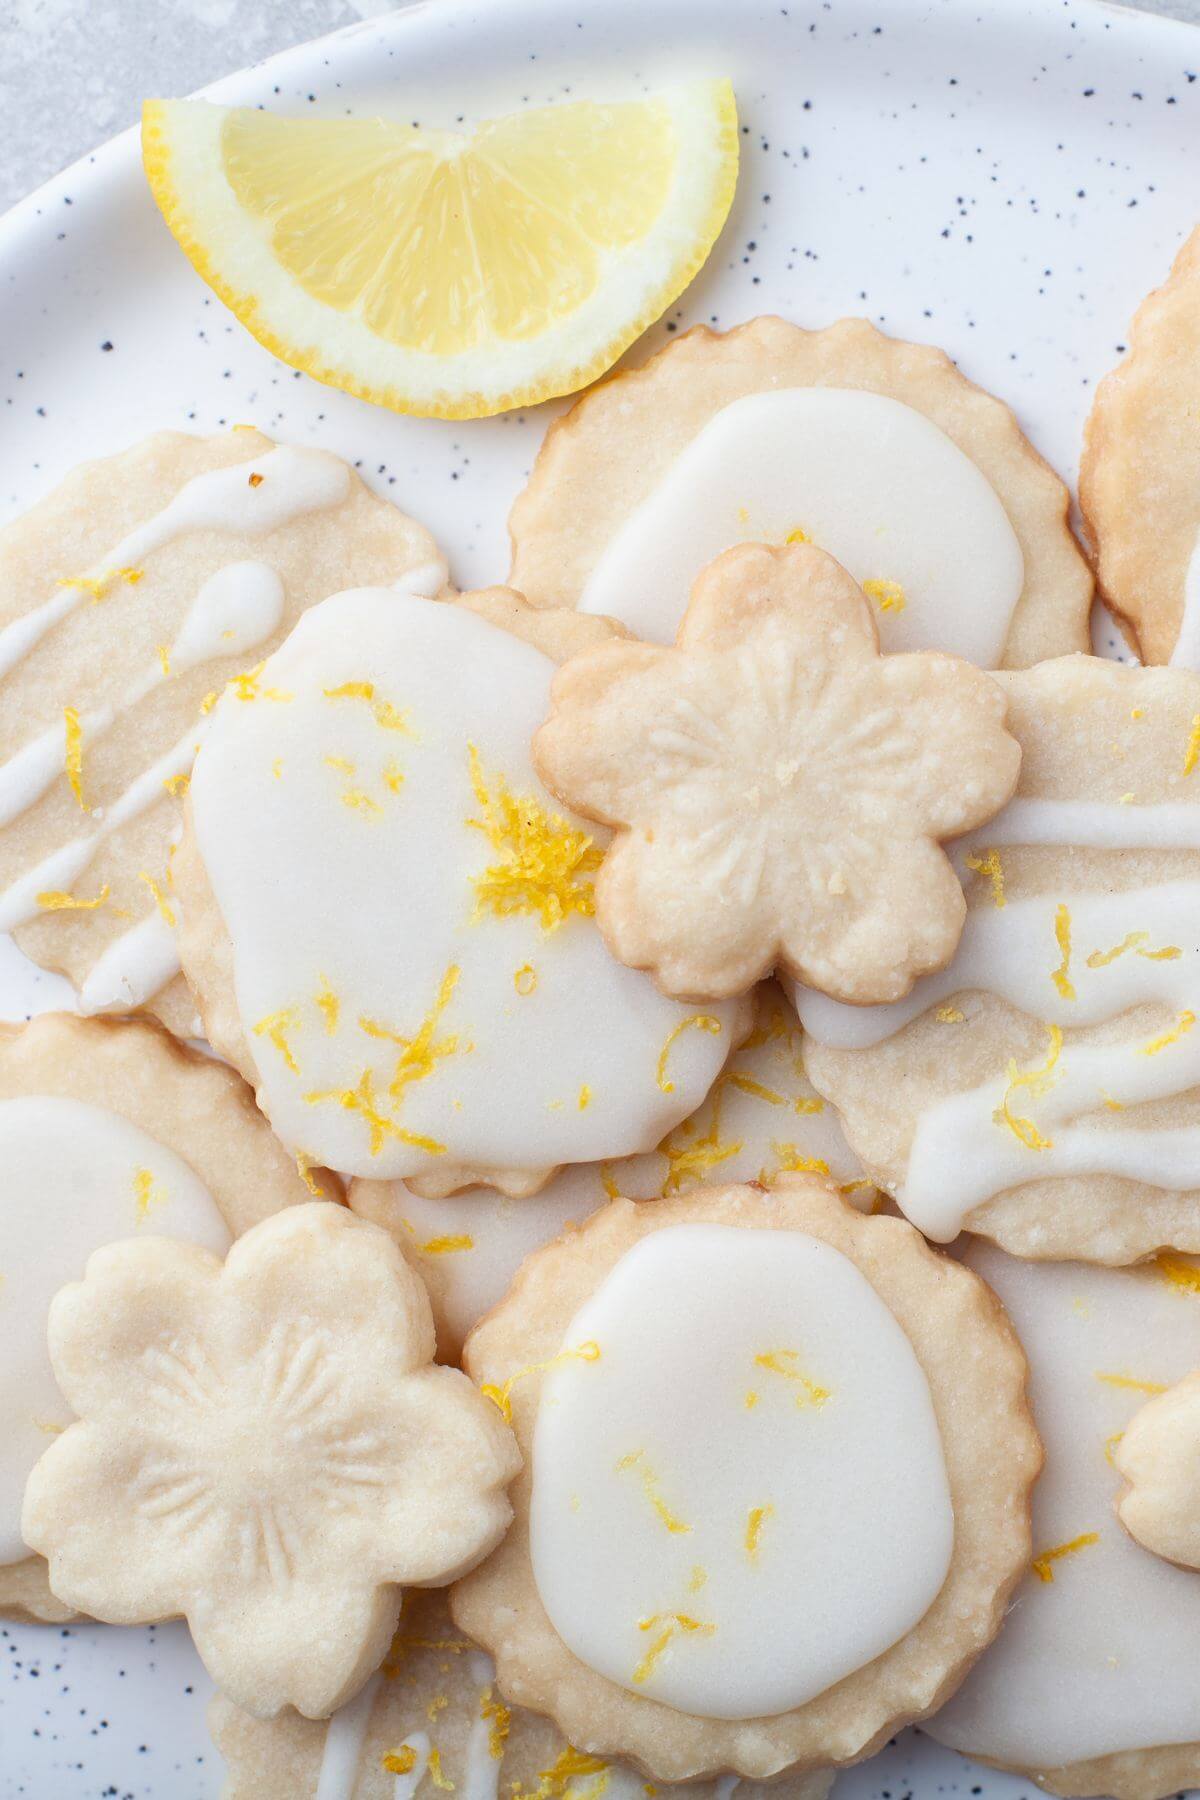 Lemon cookies shaped into flowers and round cookies are iced.